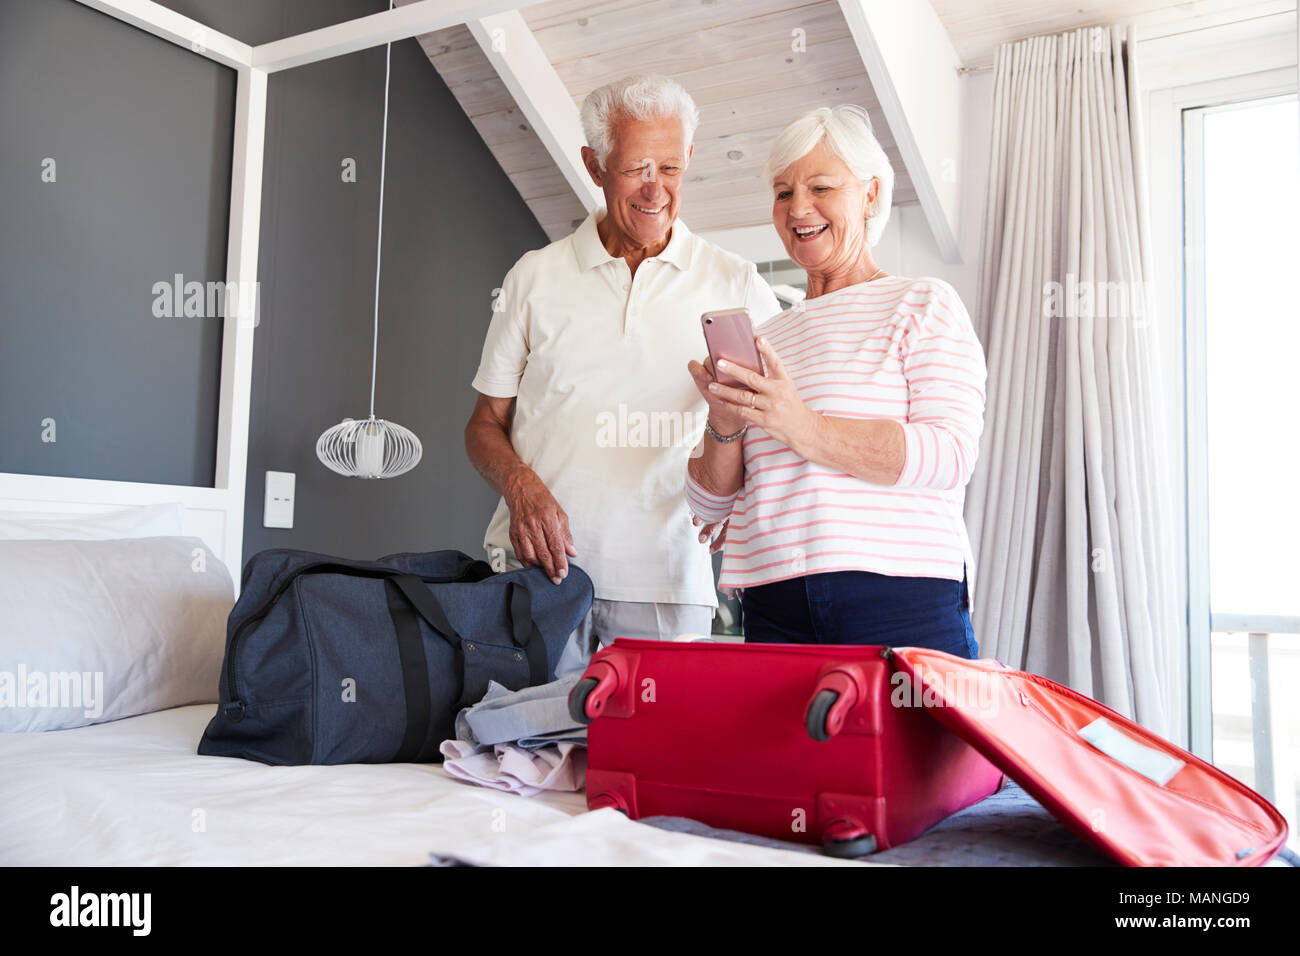 Senior Couple Look At Mobile As They Check In To Vacation Rental Stock Photo